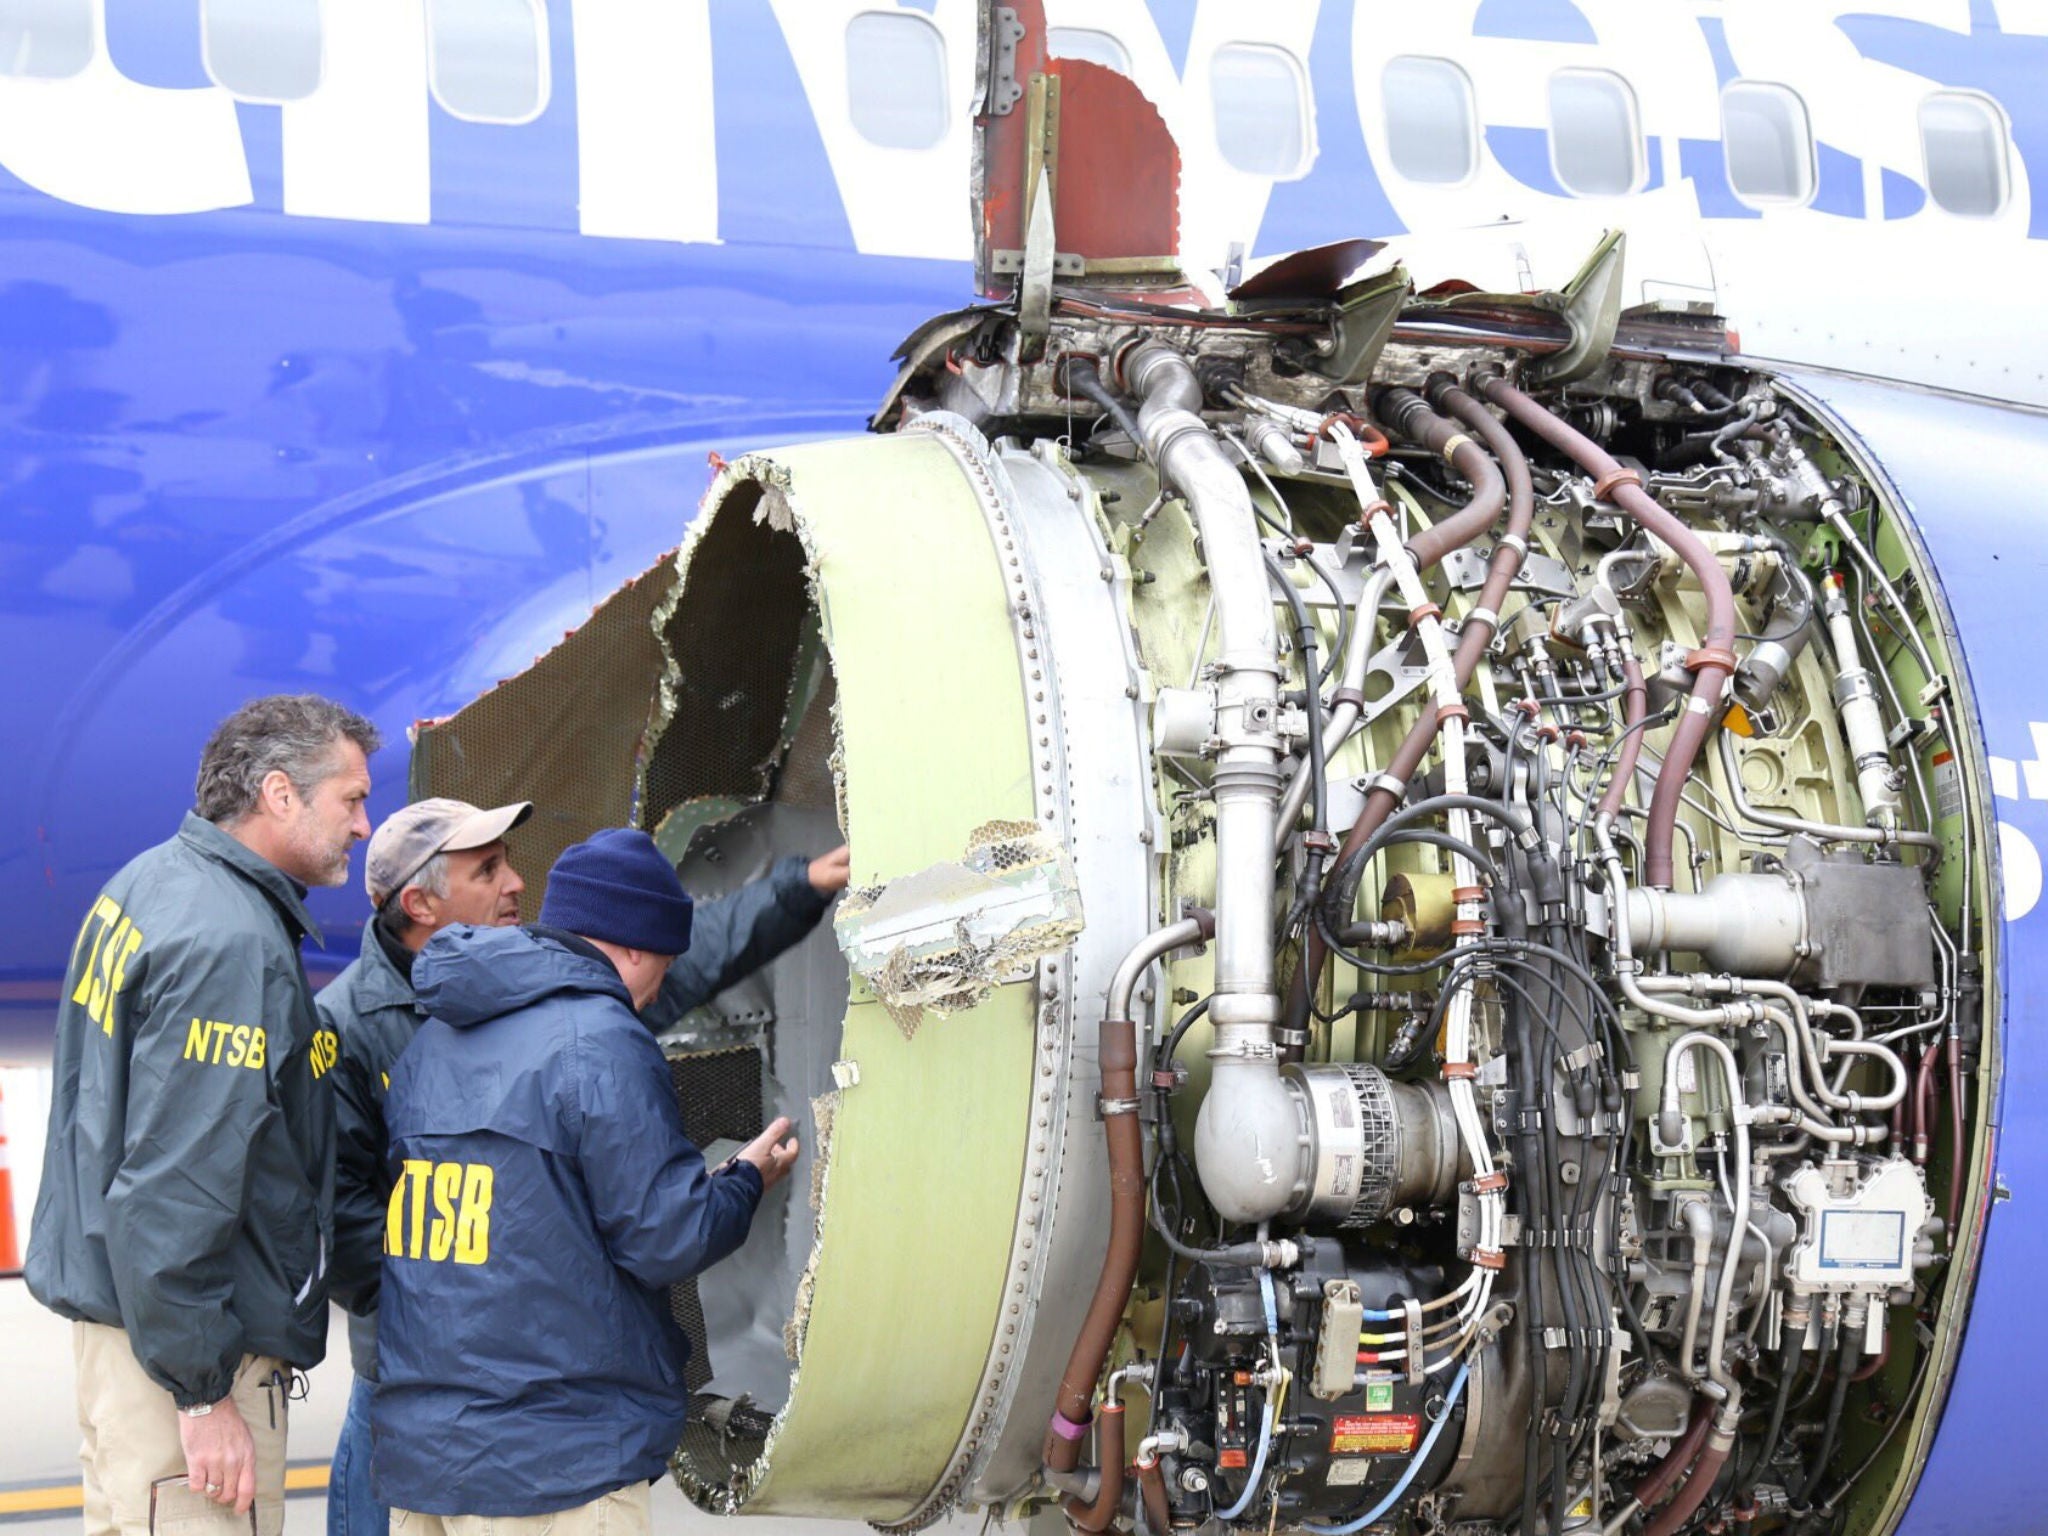 Investigators examine damage to the engine of the Southwest Airlines plane